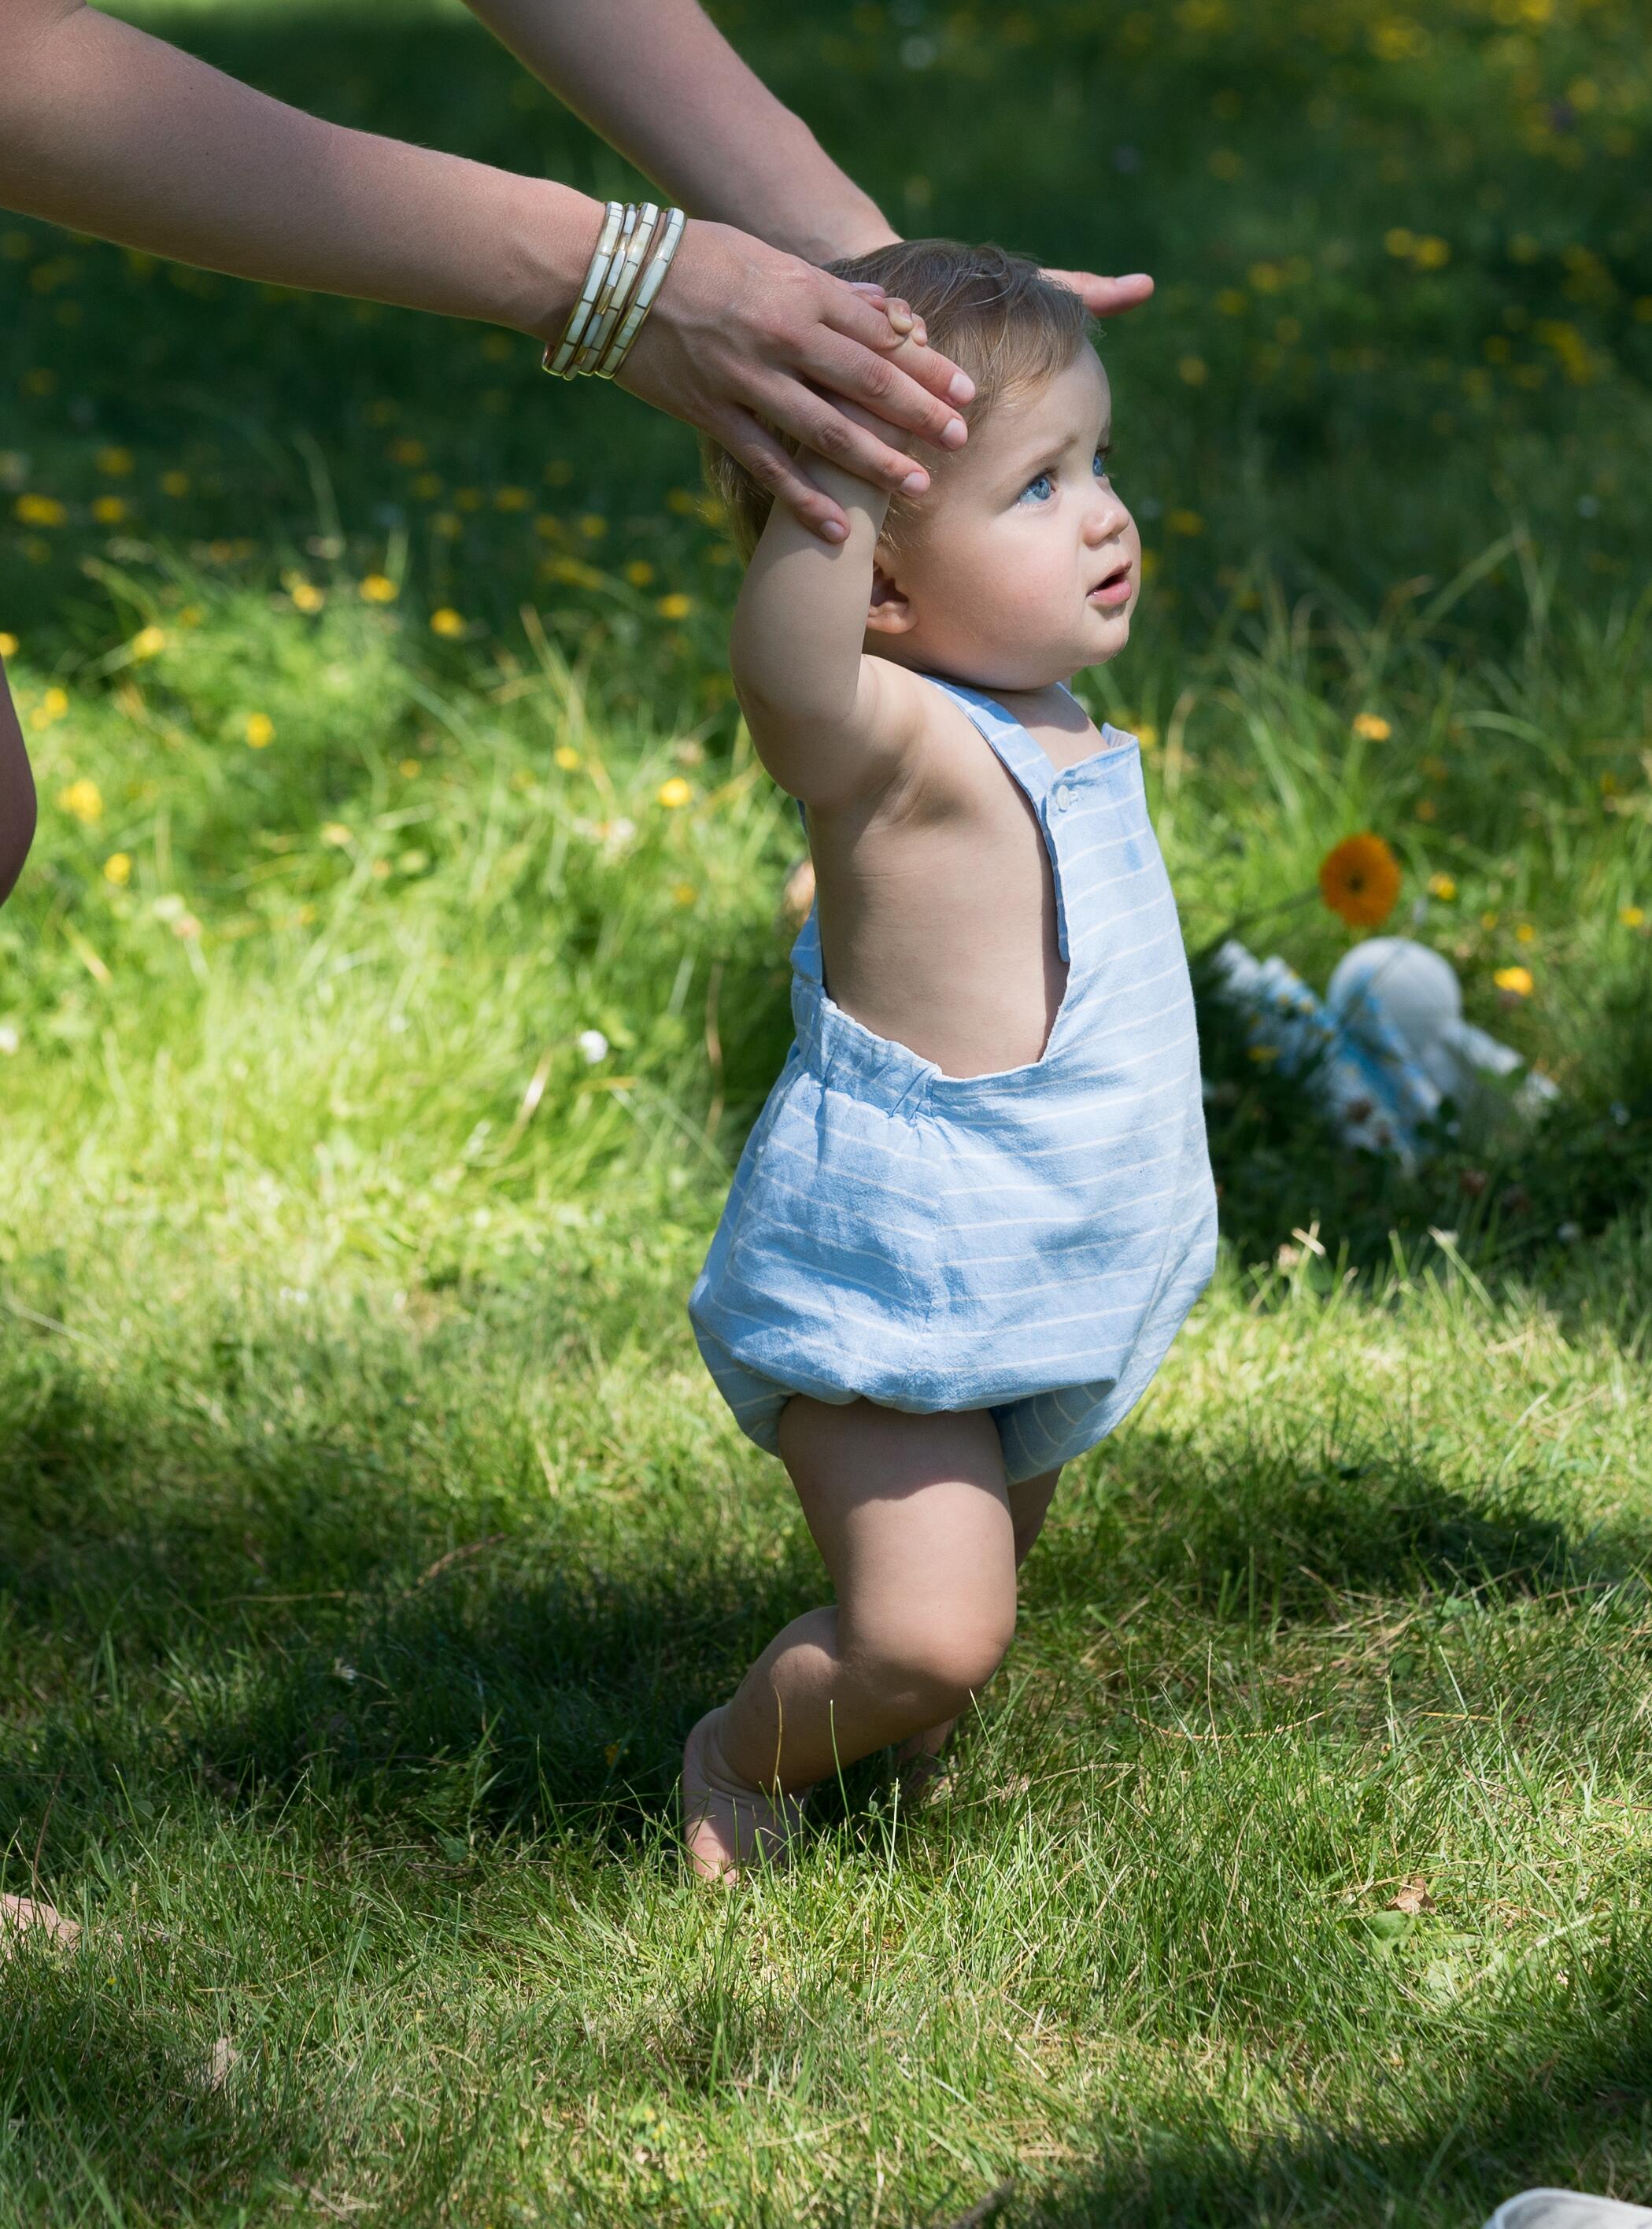 KL_BABY_SOCIAL_PICTURE_KL_BABY_WALK_July2018 472x592